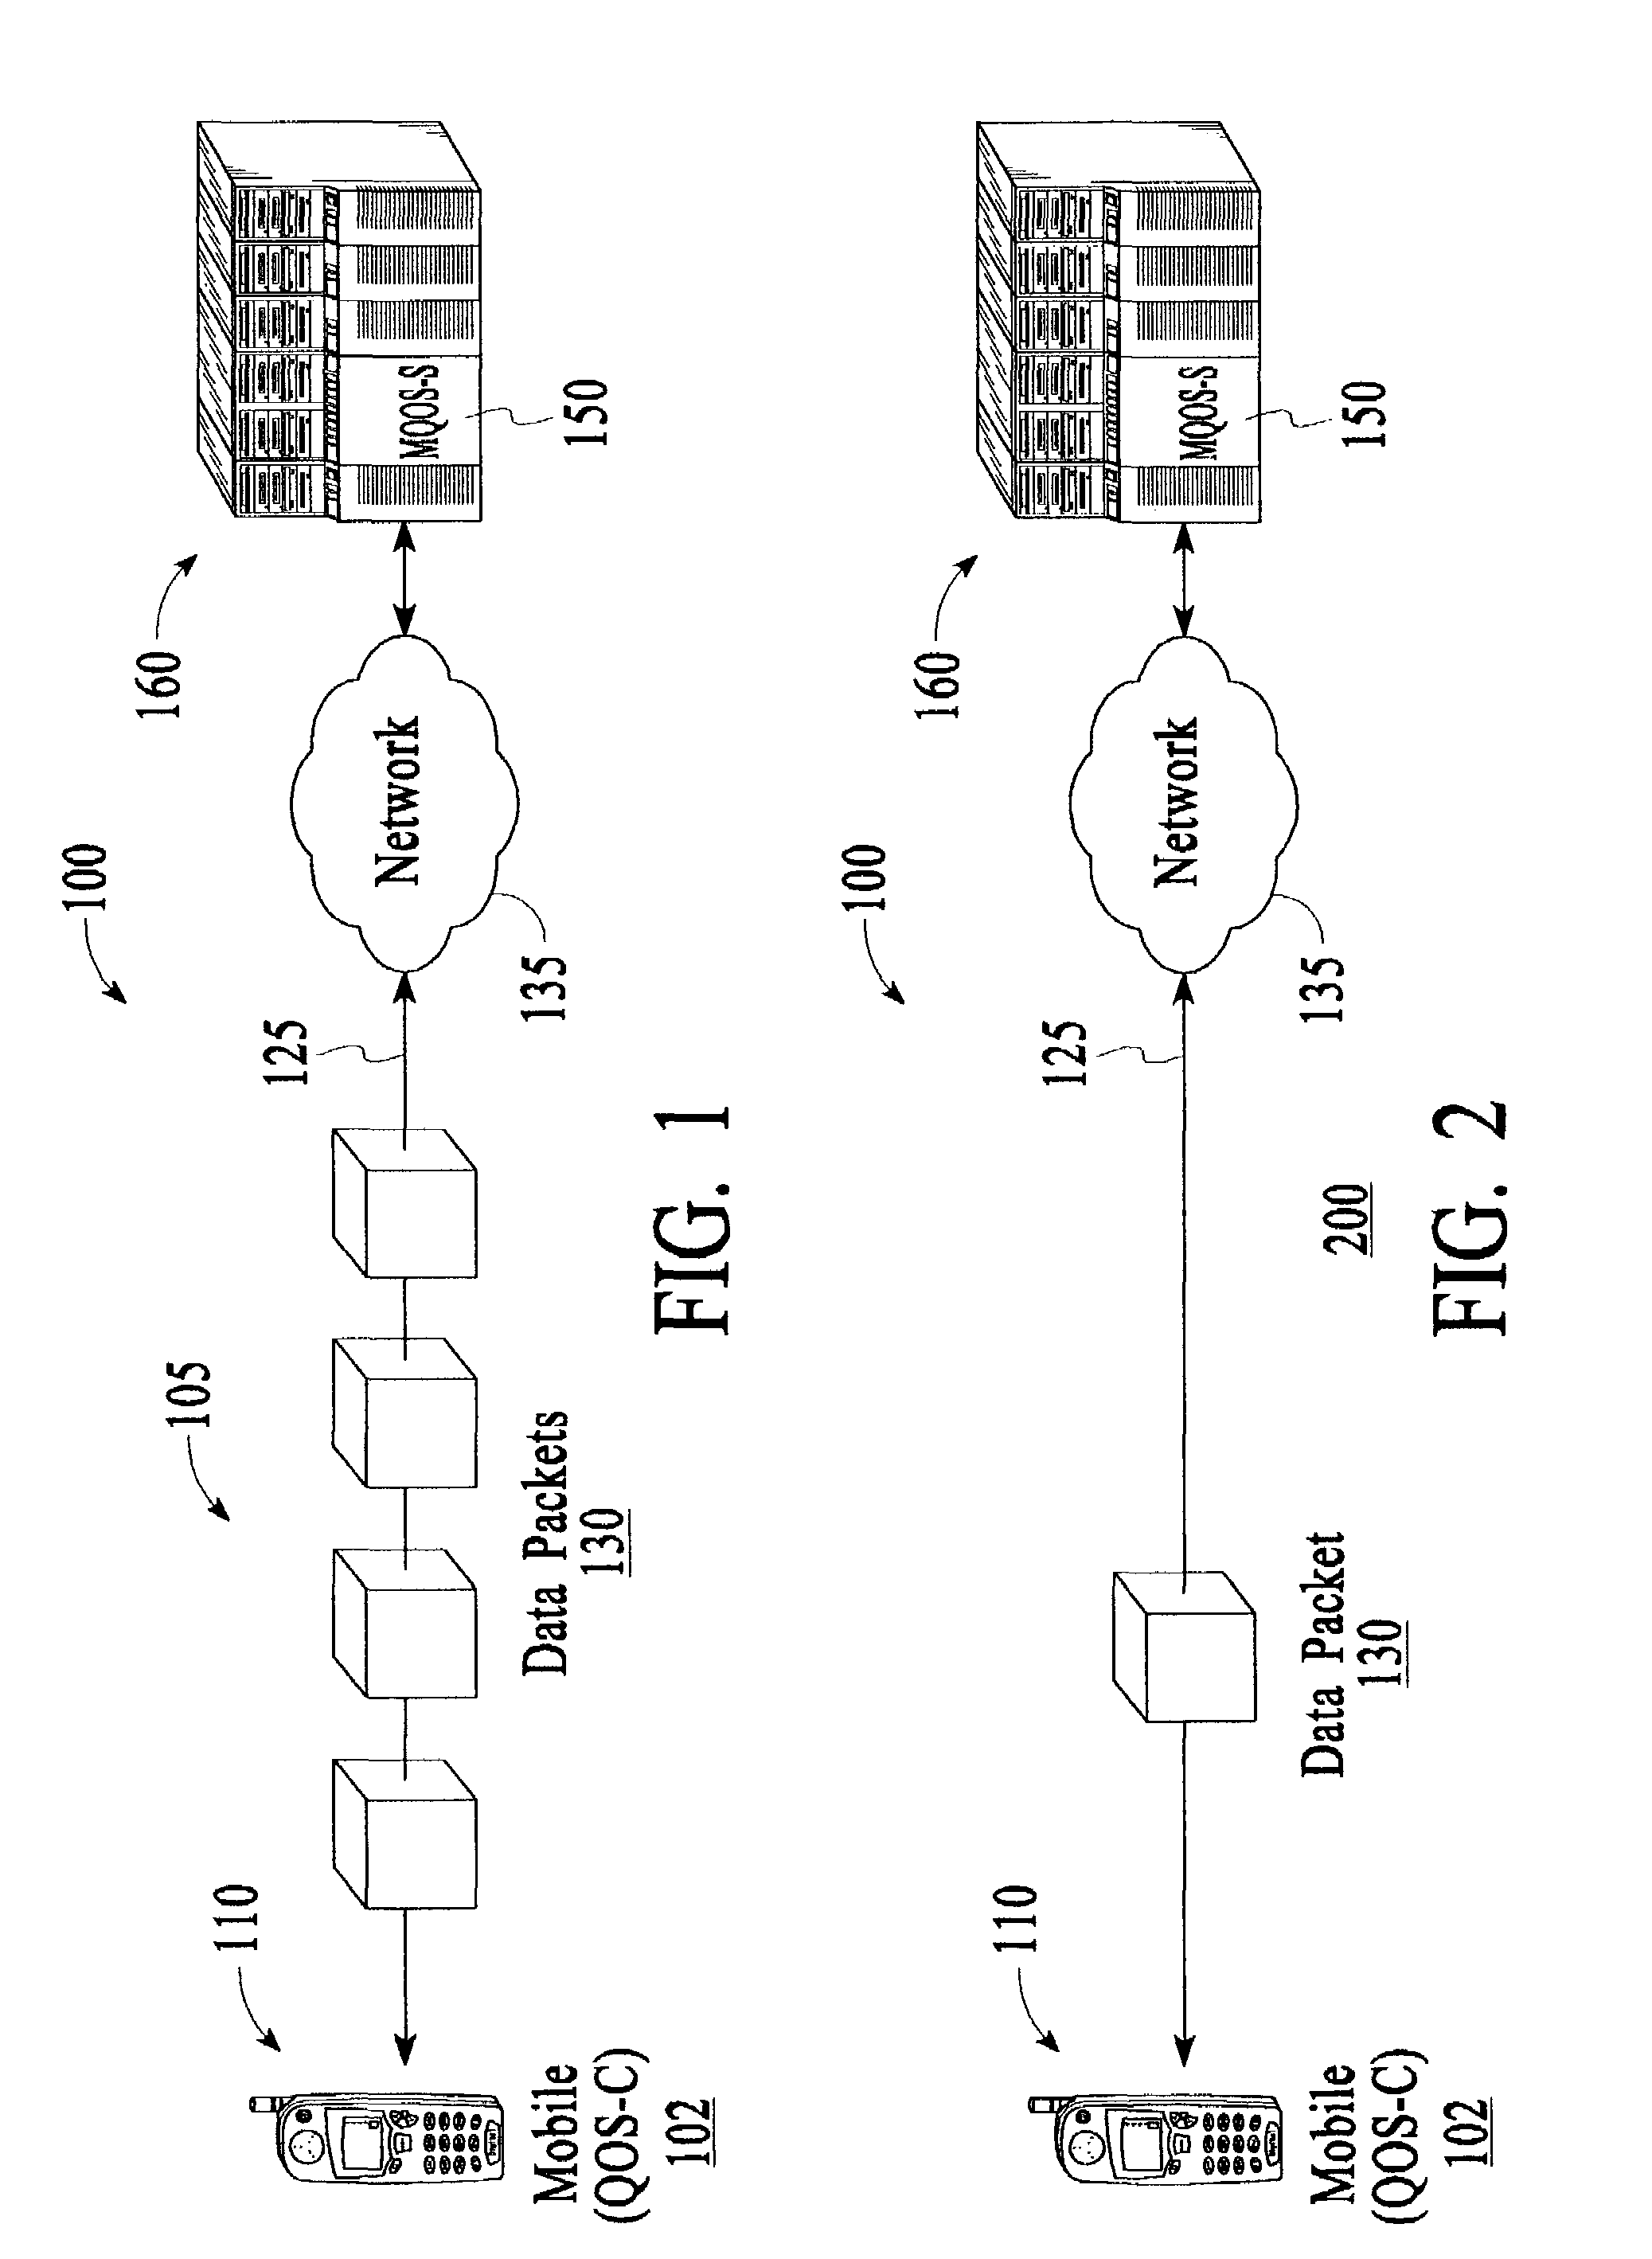 Method and system for quality of service (QoS) monitoring for wireless devices